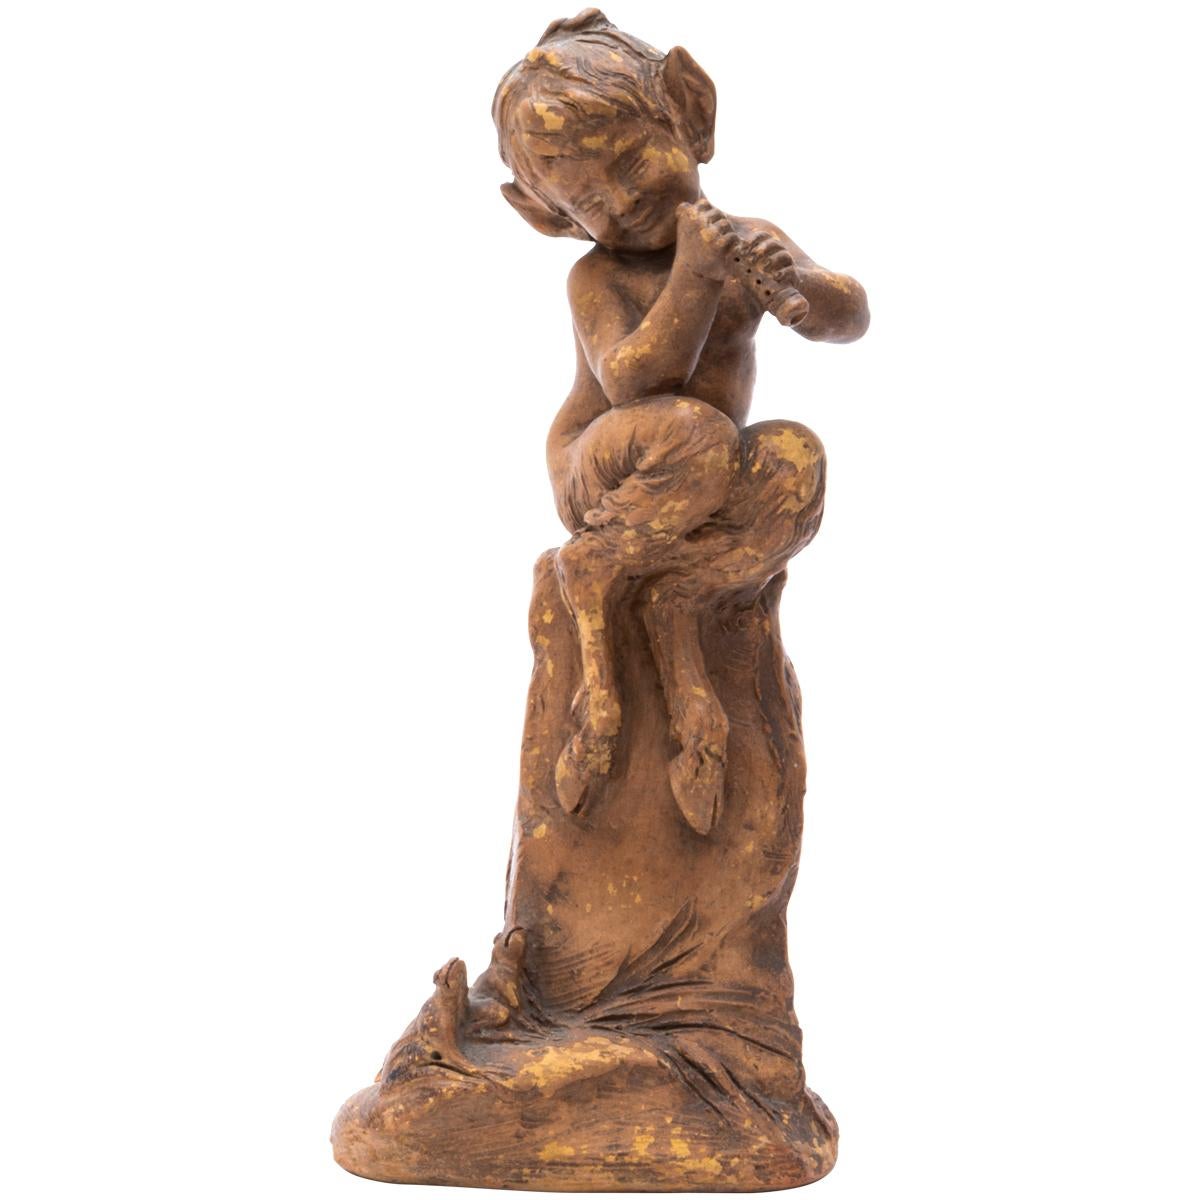 Late 19th Century French Faun Sculpture Signed by Cohill